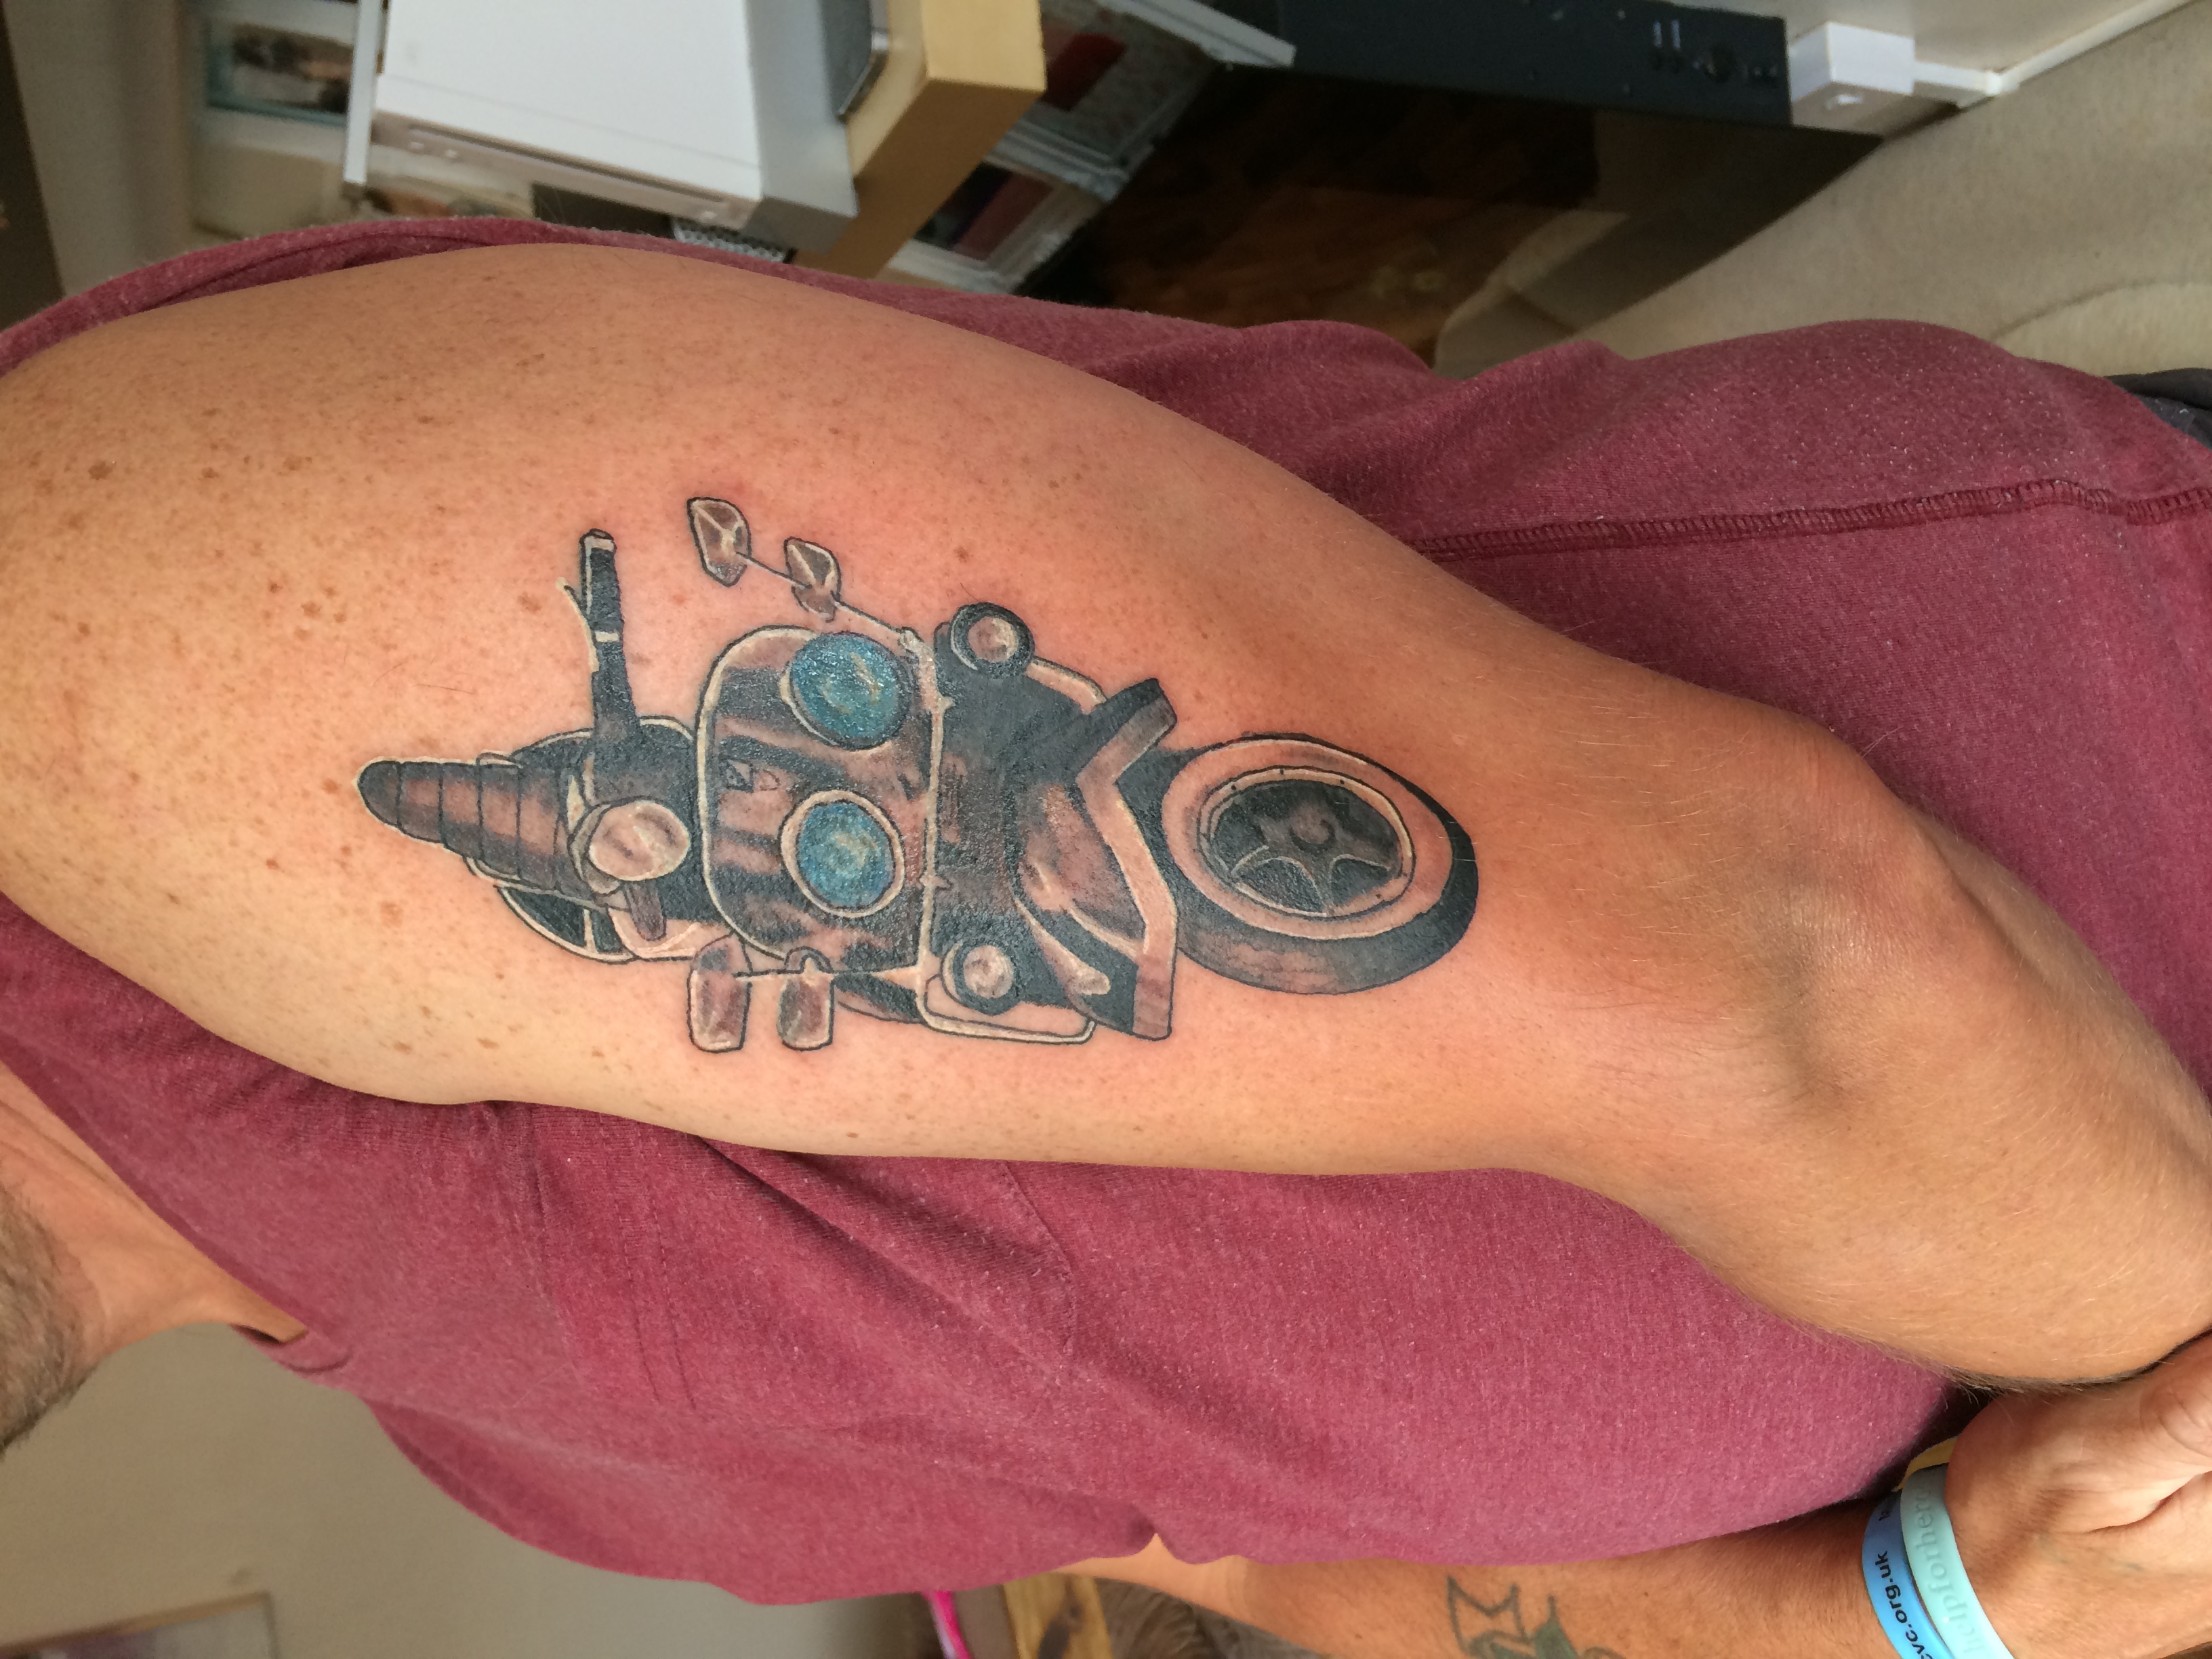 Our scoot - Scooter Tattoo On Bicep